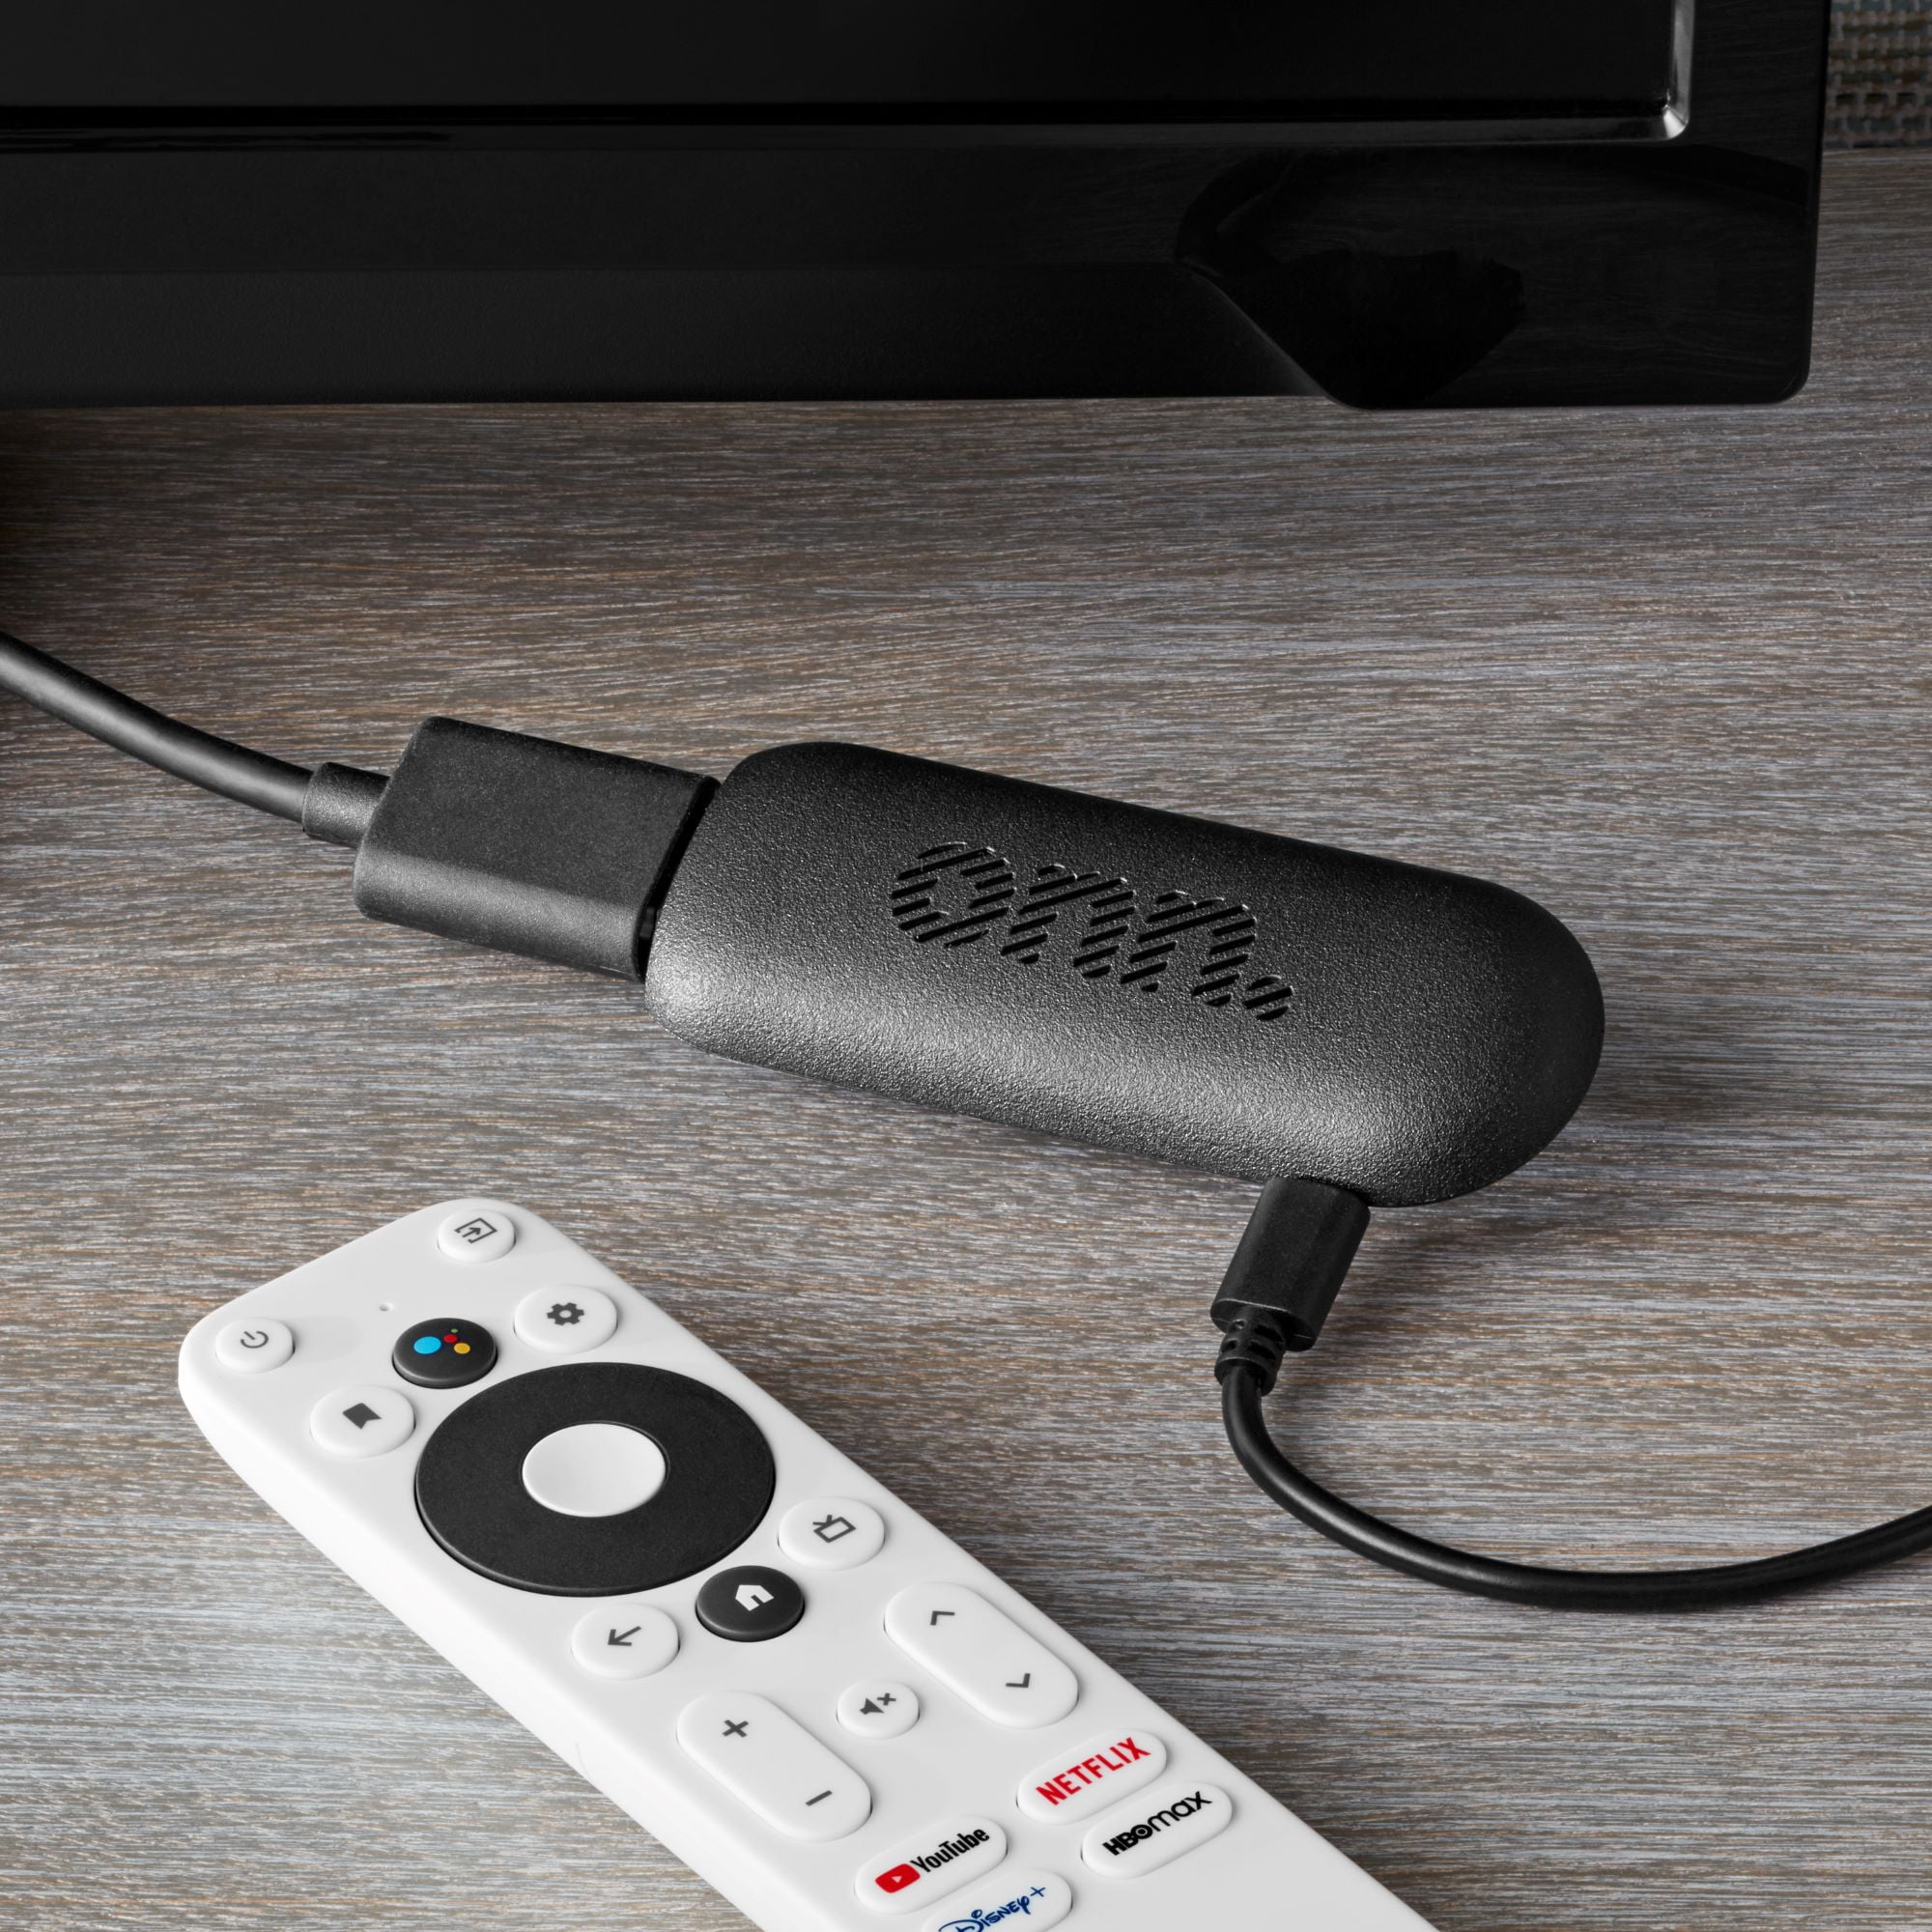 onn. Android TV 2K FHD Streaming Stick with Remote Control & Power Adapter  